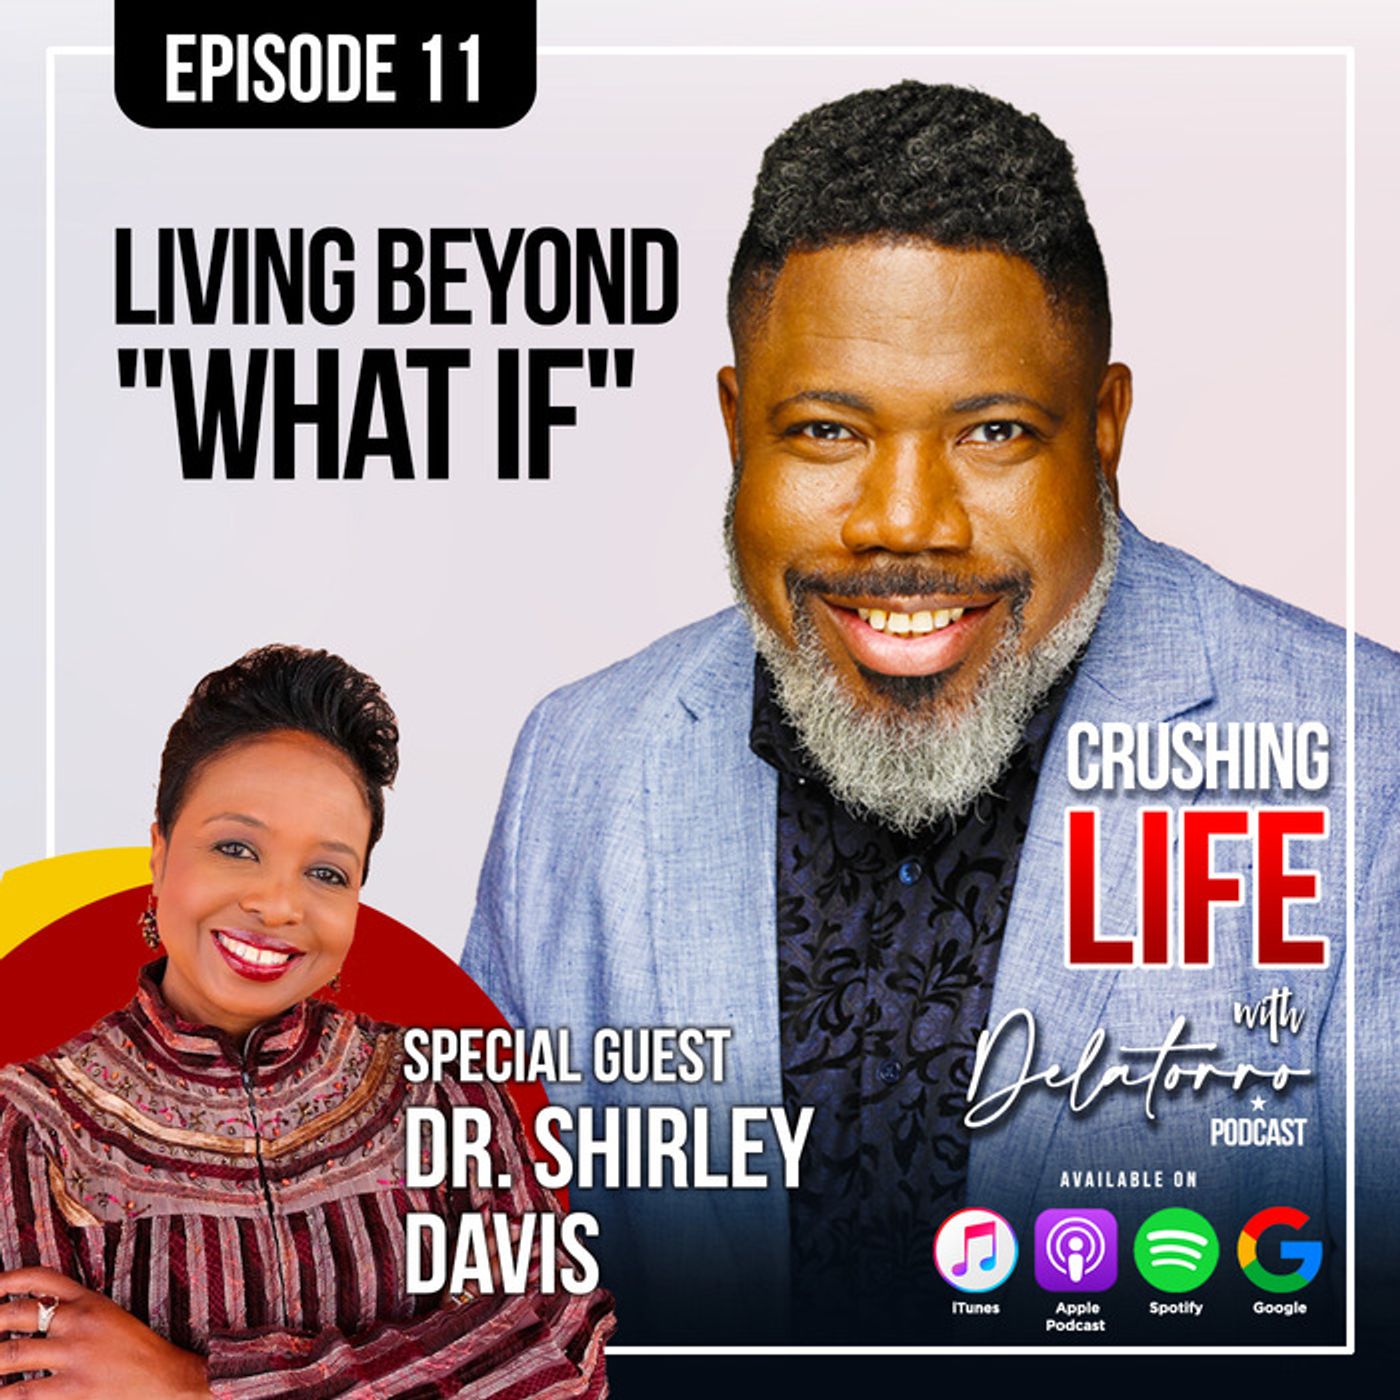 Crushing Life with Delatorro Podcast Episode #11 - Living Beyond “What If” Image